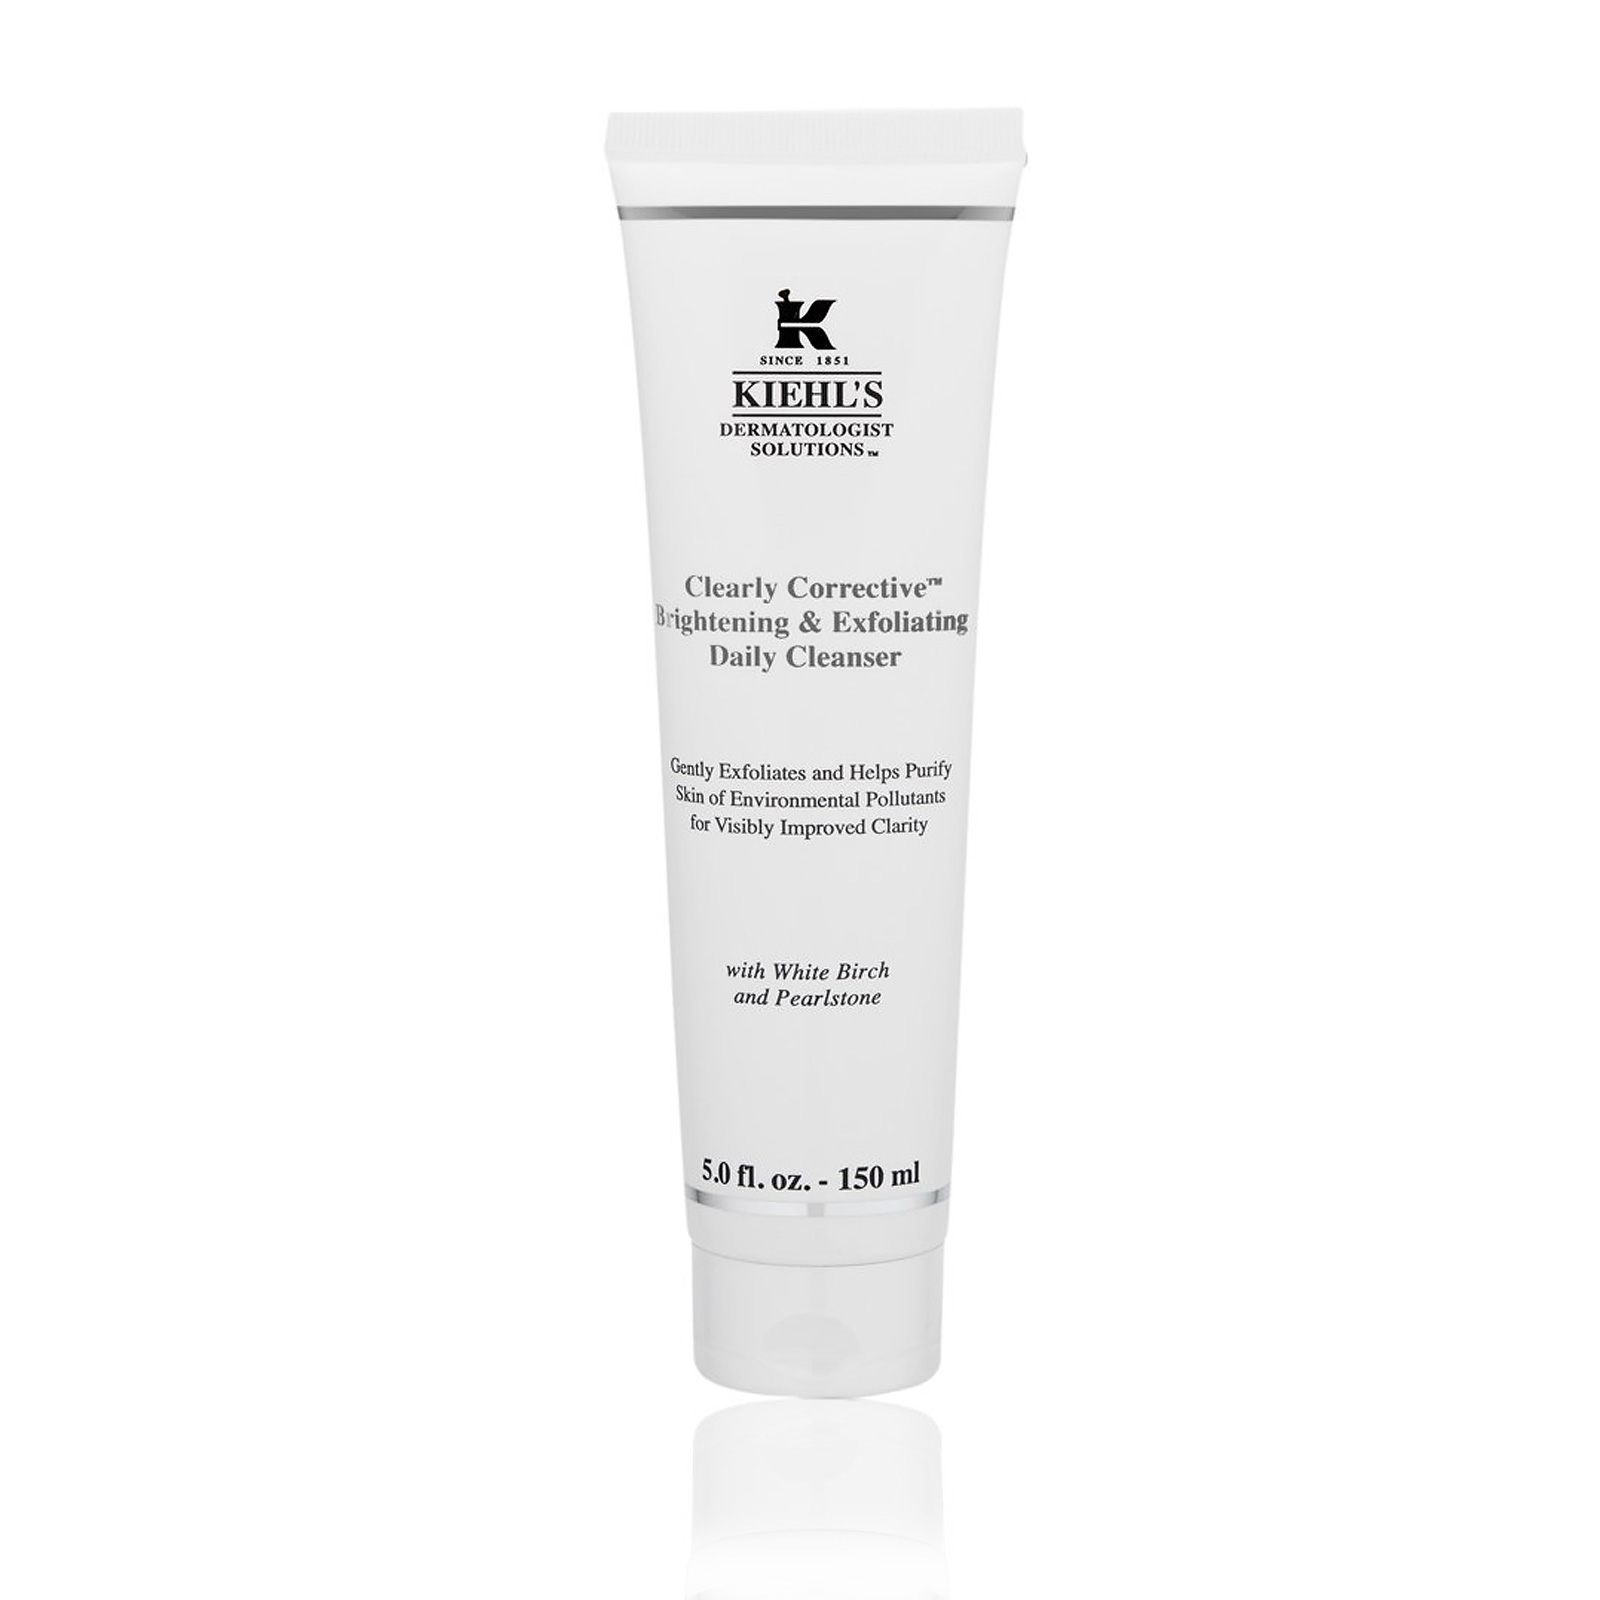 Clearly Corrective Brightening & Exfoliating Daily Cleanser